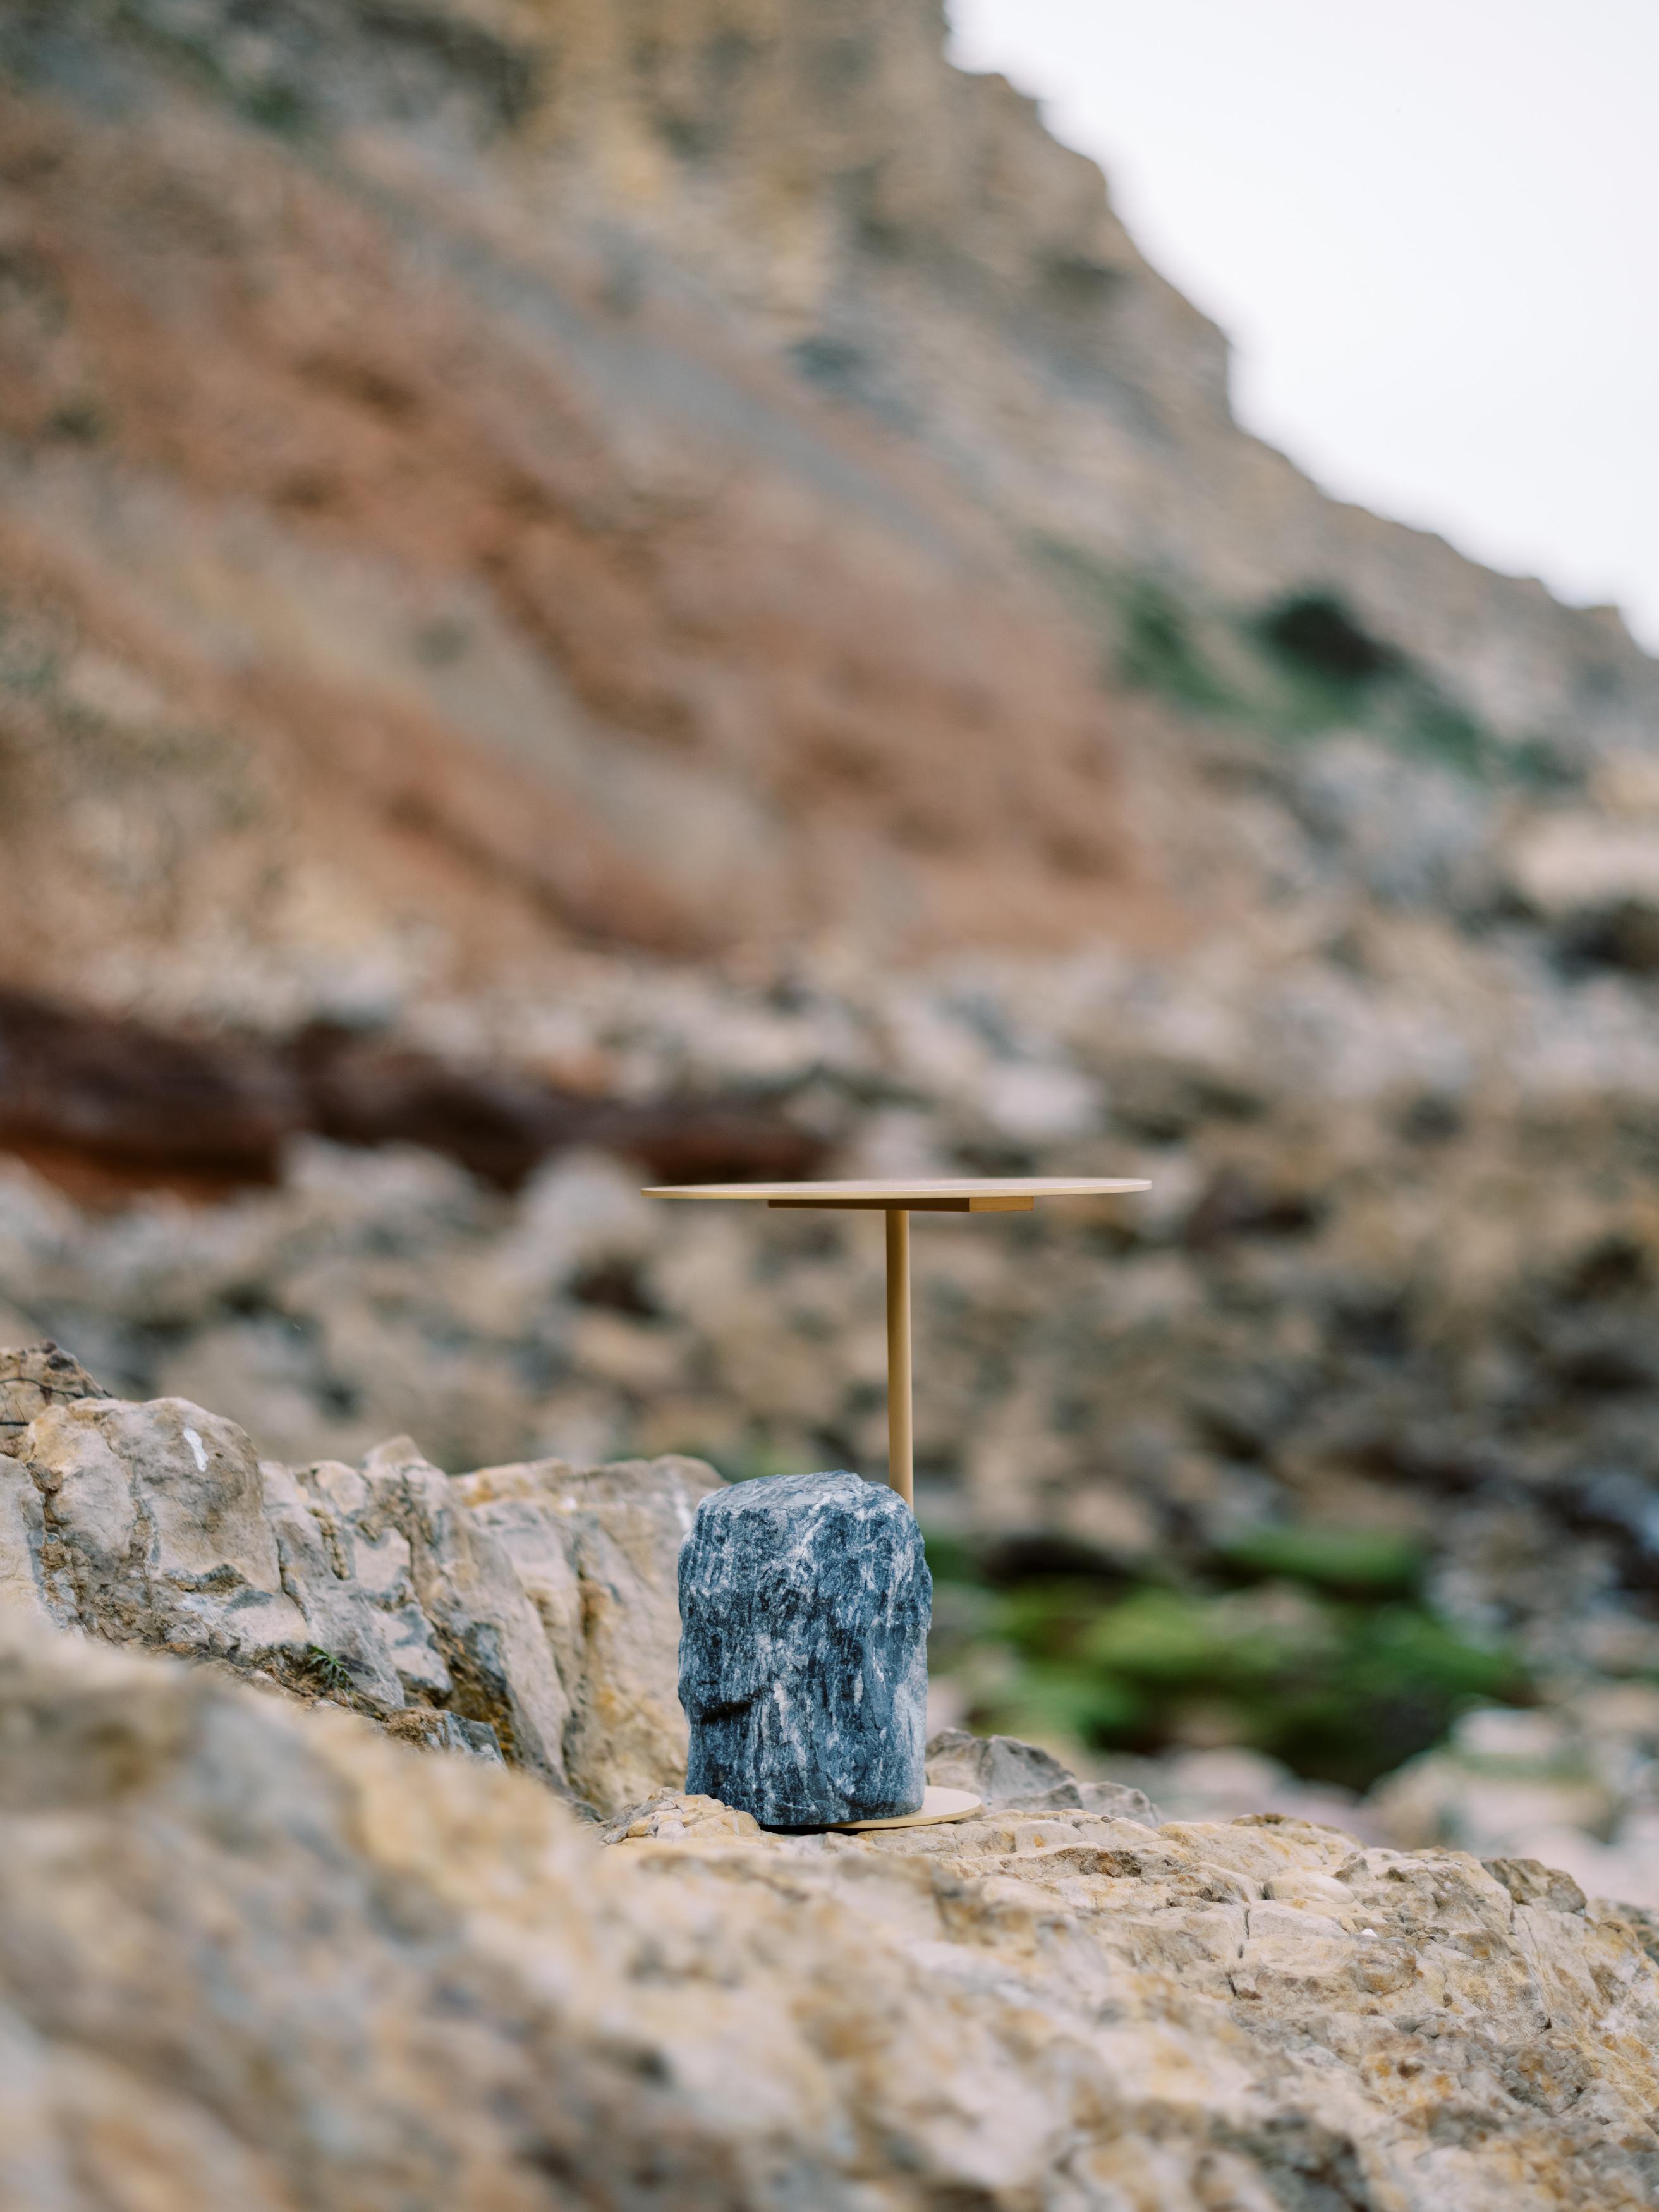 Pico Side Table, Contemporary Collection, Handcrafted in Portugal - Europe by Greenapple.

Pico is a natural element that breathes life into any space. Inspired by the nature of the island of Pico in the Azores, this exquisite piece from the Perfect